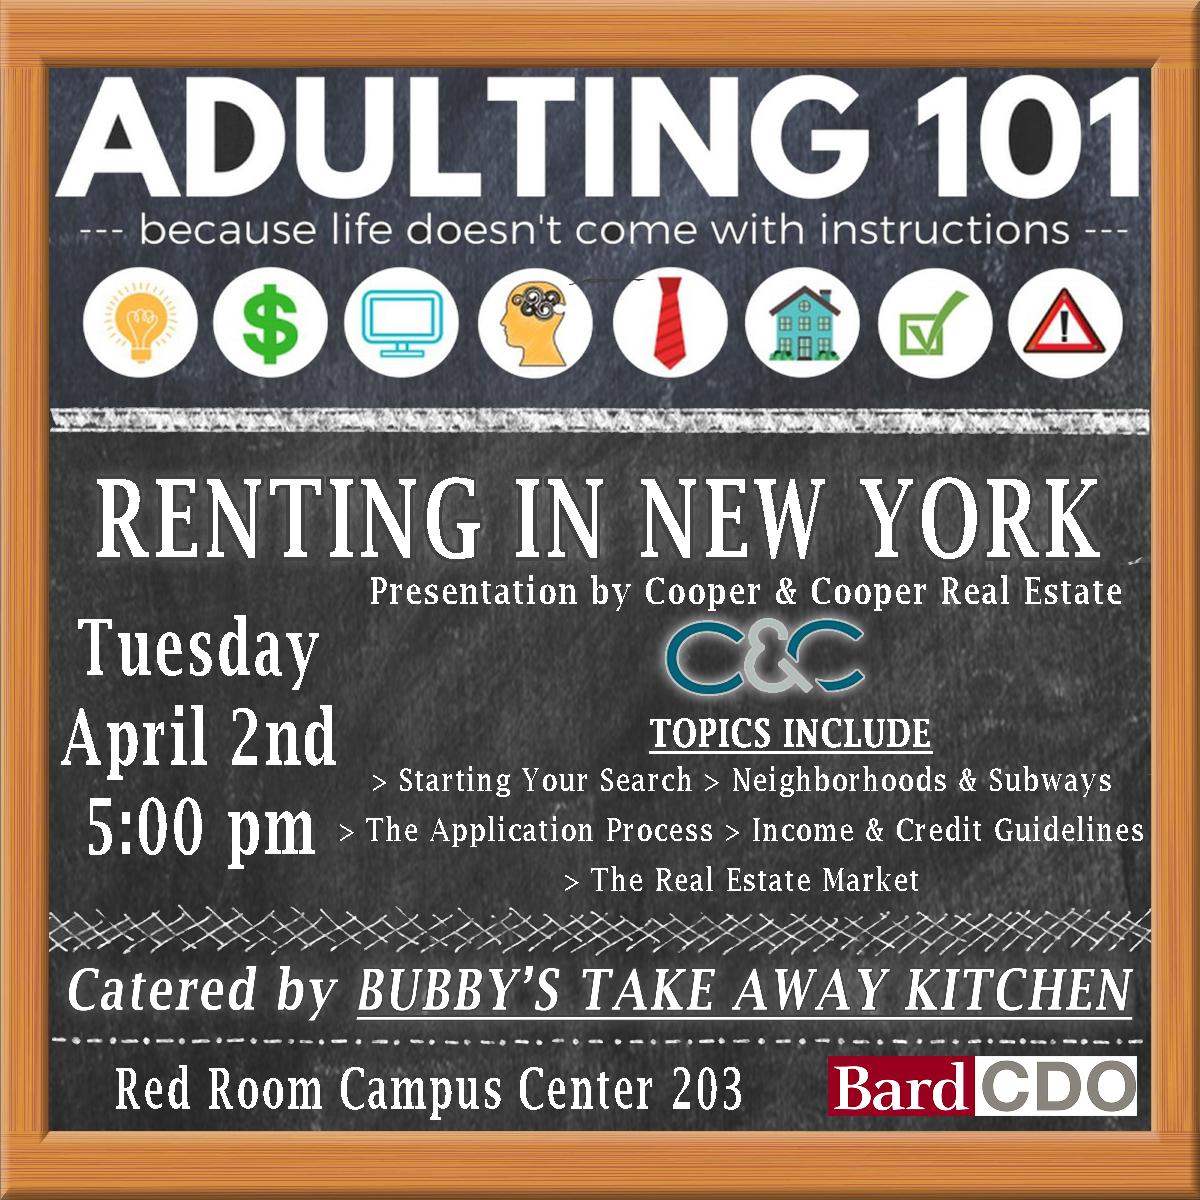 ADULTING 101: Renting in New York